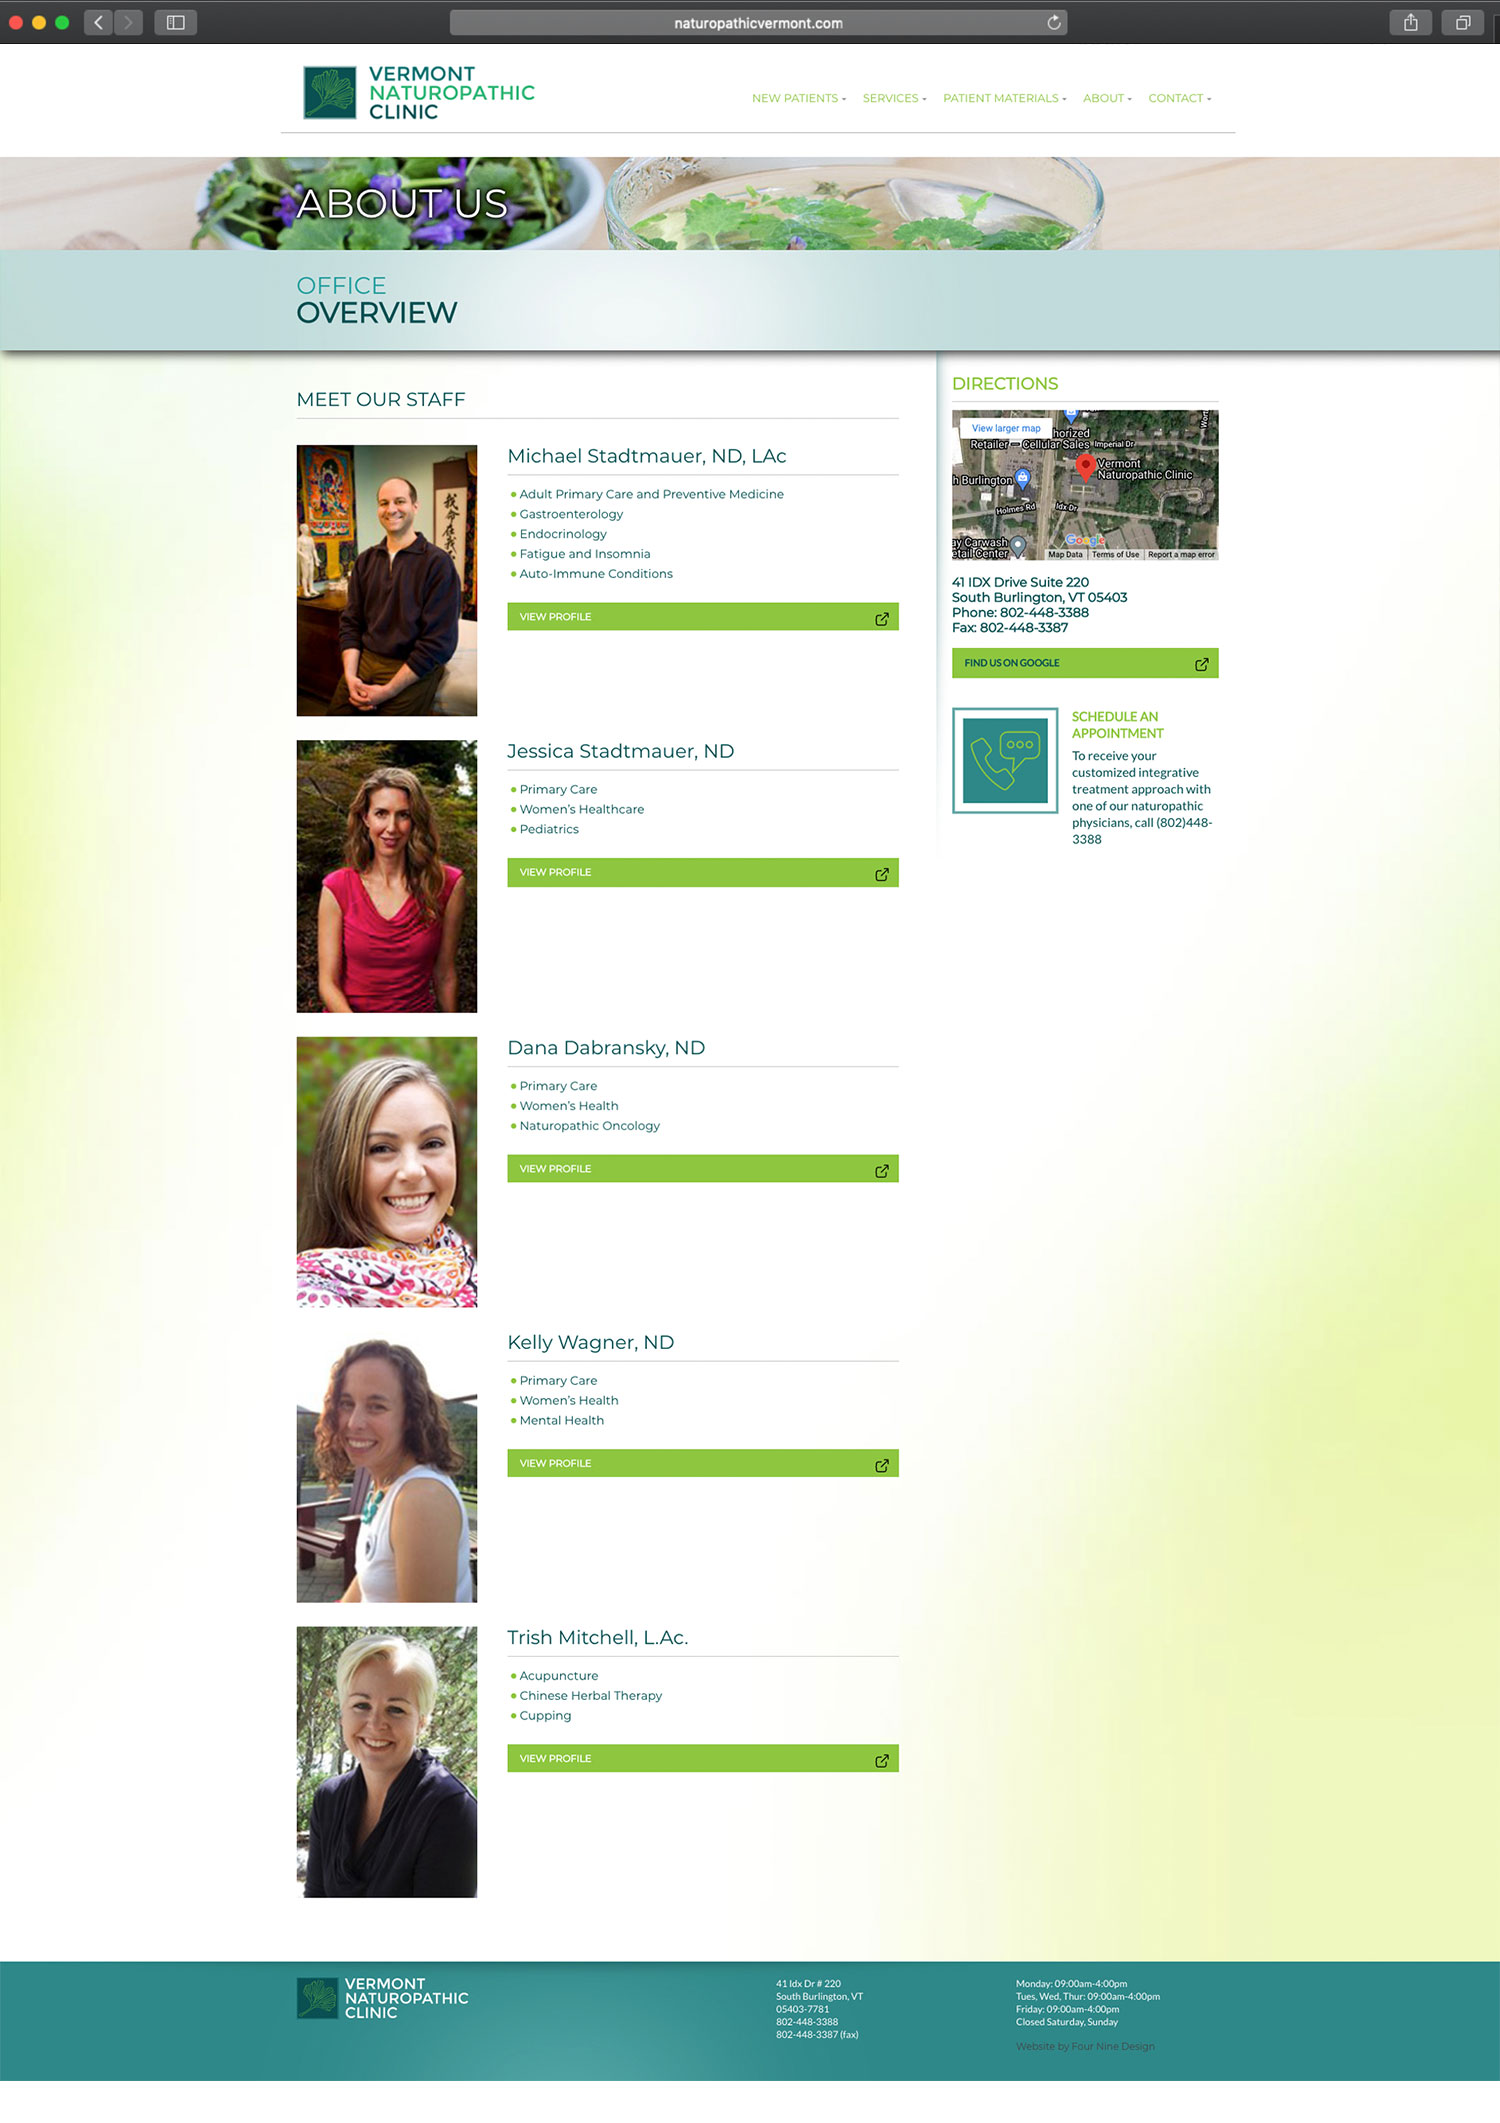 Website design and website development for Vermont Naturopathic Clinic - secondary page view.